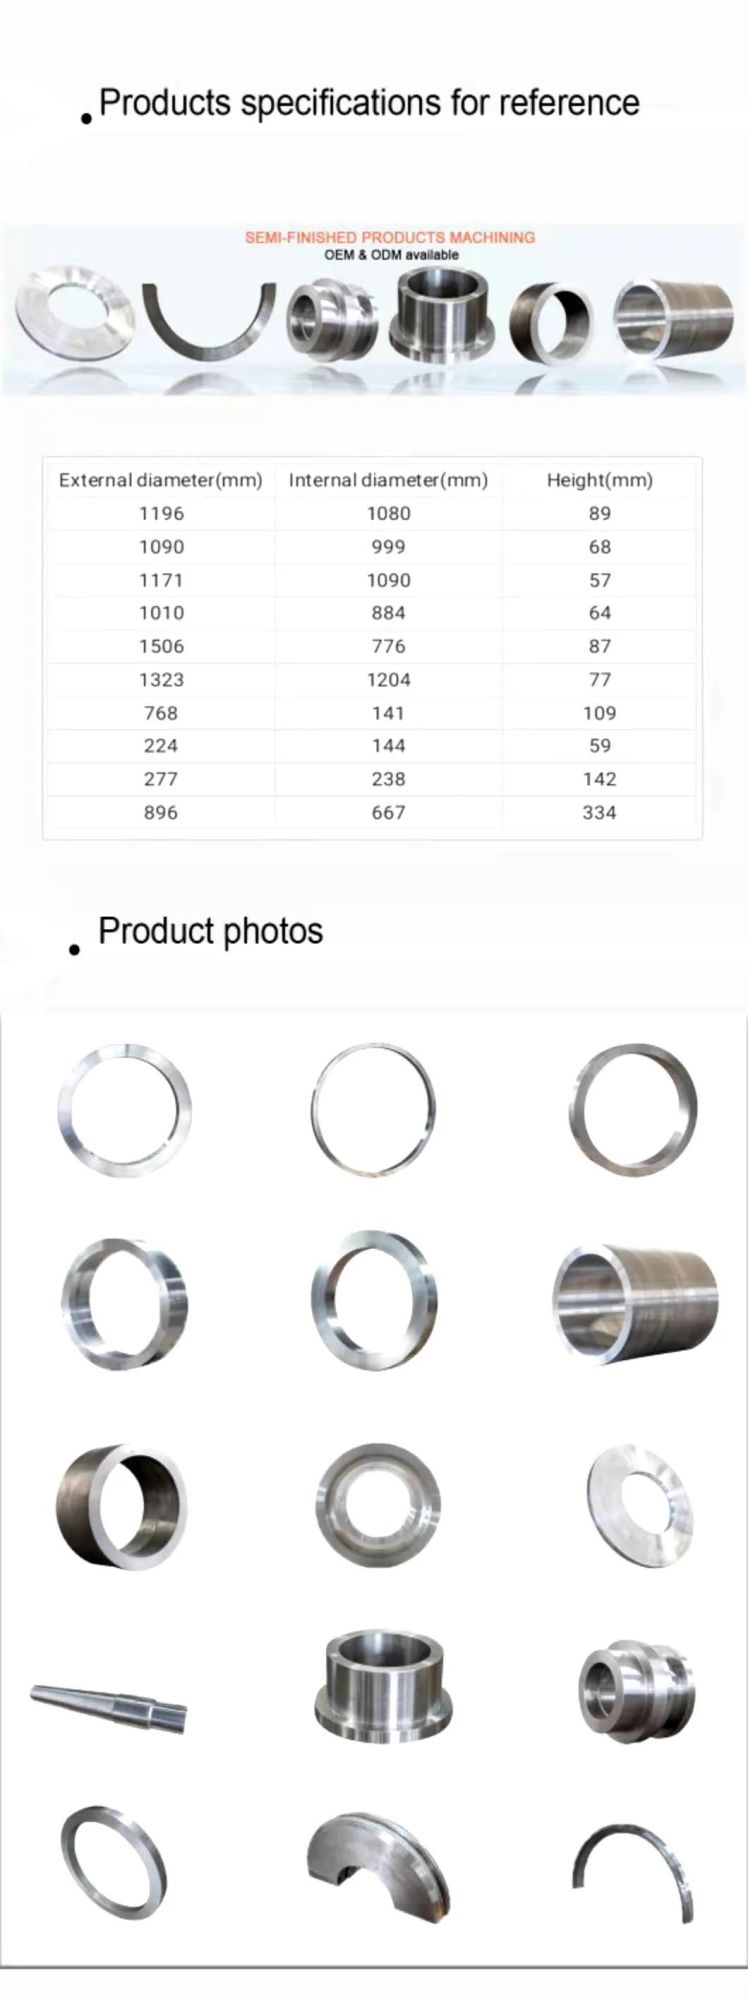 Petroleum / Feed Industry Equipment Machinery Parts Processing Shaft